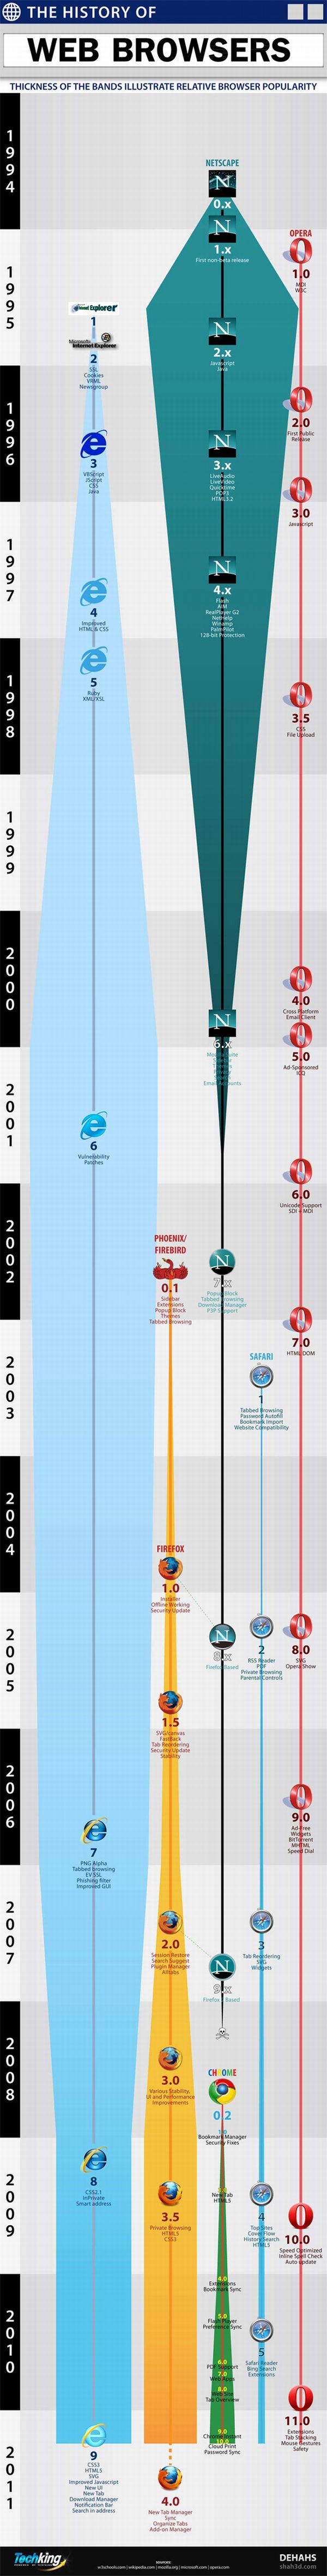 The Evolution Of Web Browsers (infographic)